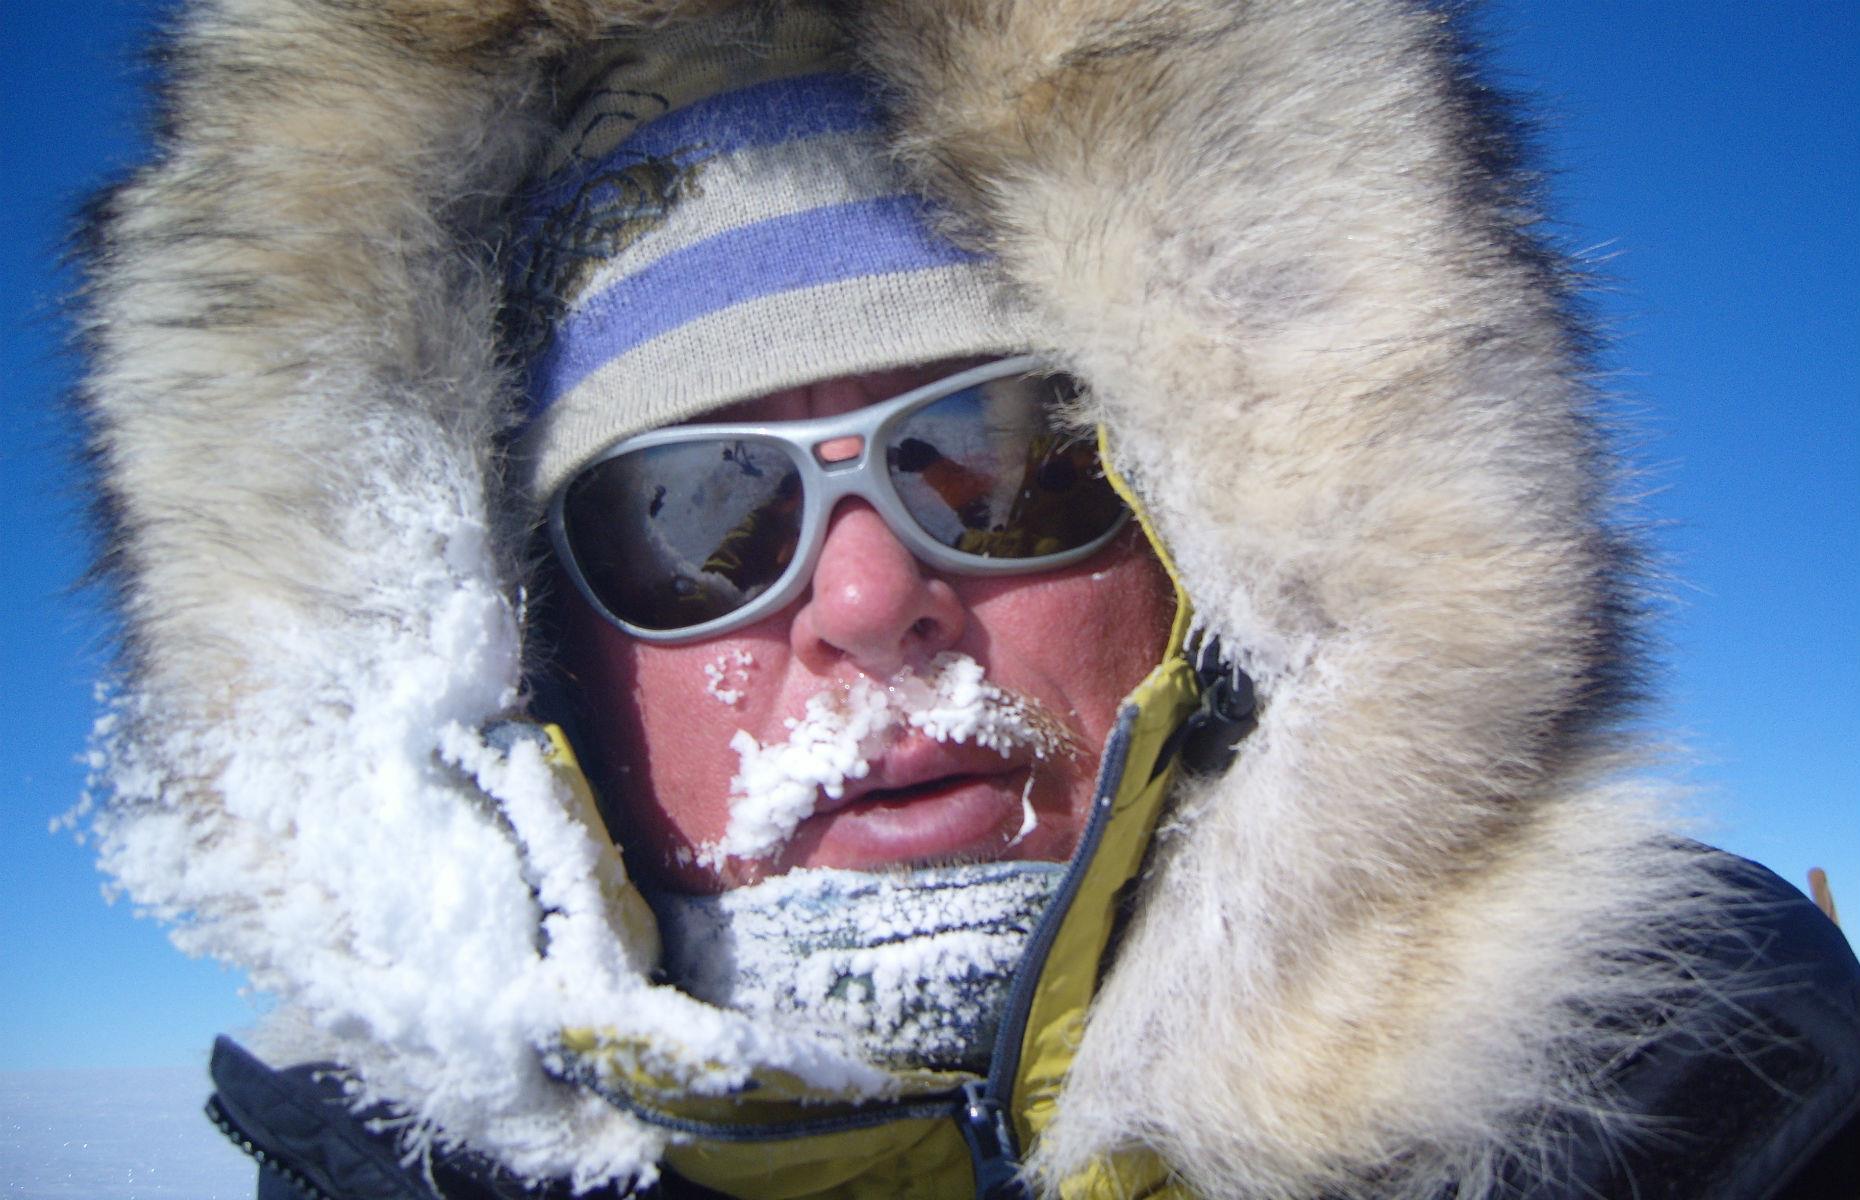 Adventurer, Arctic survival specialist and motivational speaker, Alan Chambers led the first British team to walk unsupported from Canada to the geographic North Pole. This ambitious expedition saw his team walking in temperatures as low as -85°F (-65°C) while dragging a sledge weighing several hundred pounds. Battling severe weather and exhaustion, the team fought extreme weight-loss and malnutrition to achieve their goal.